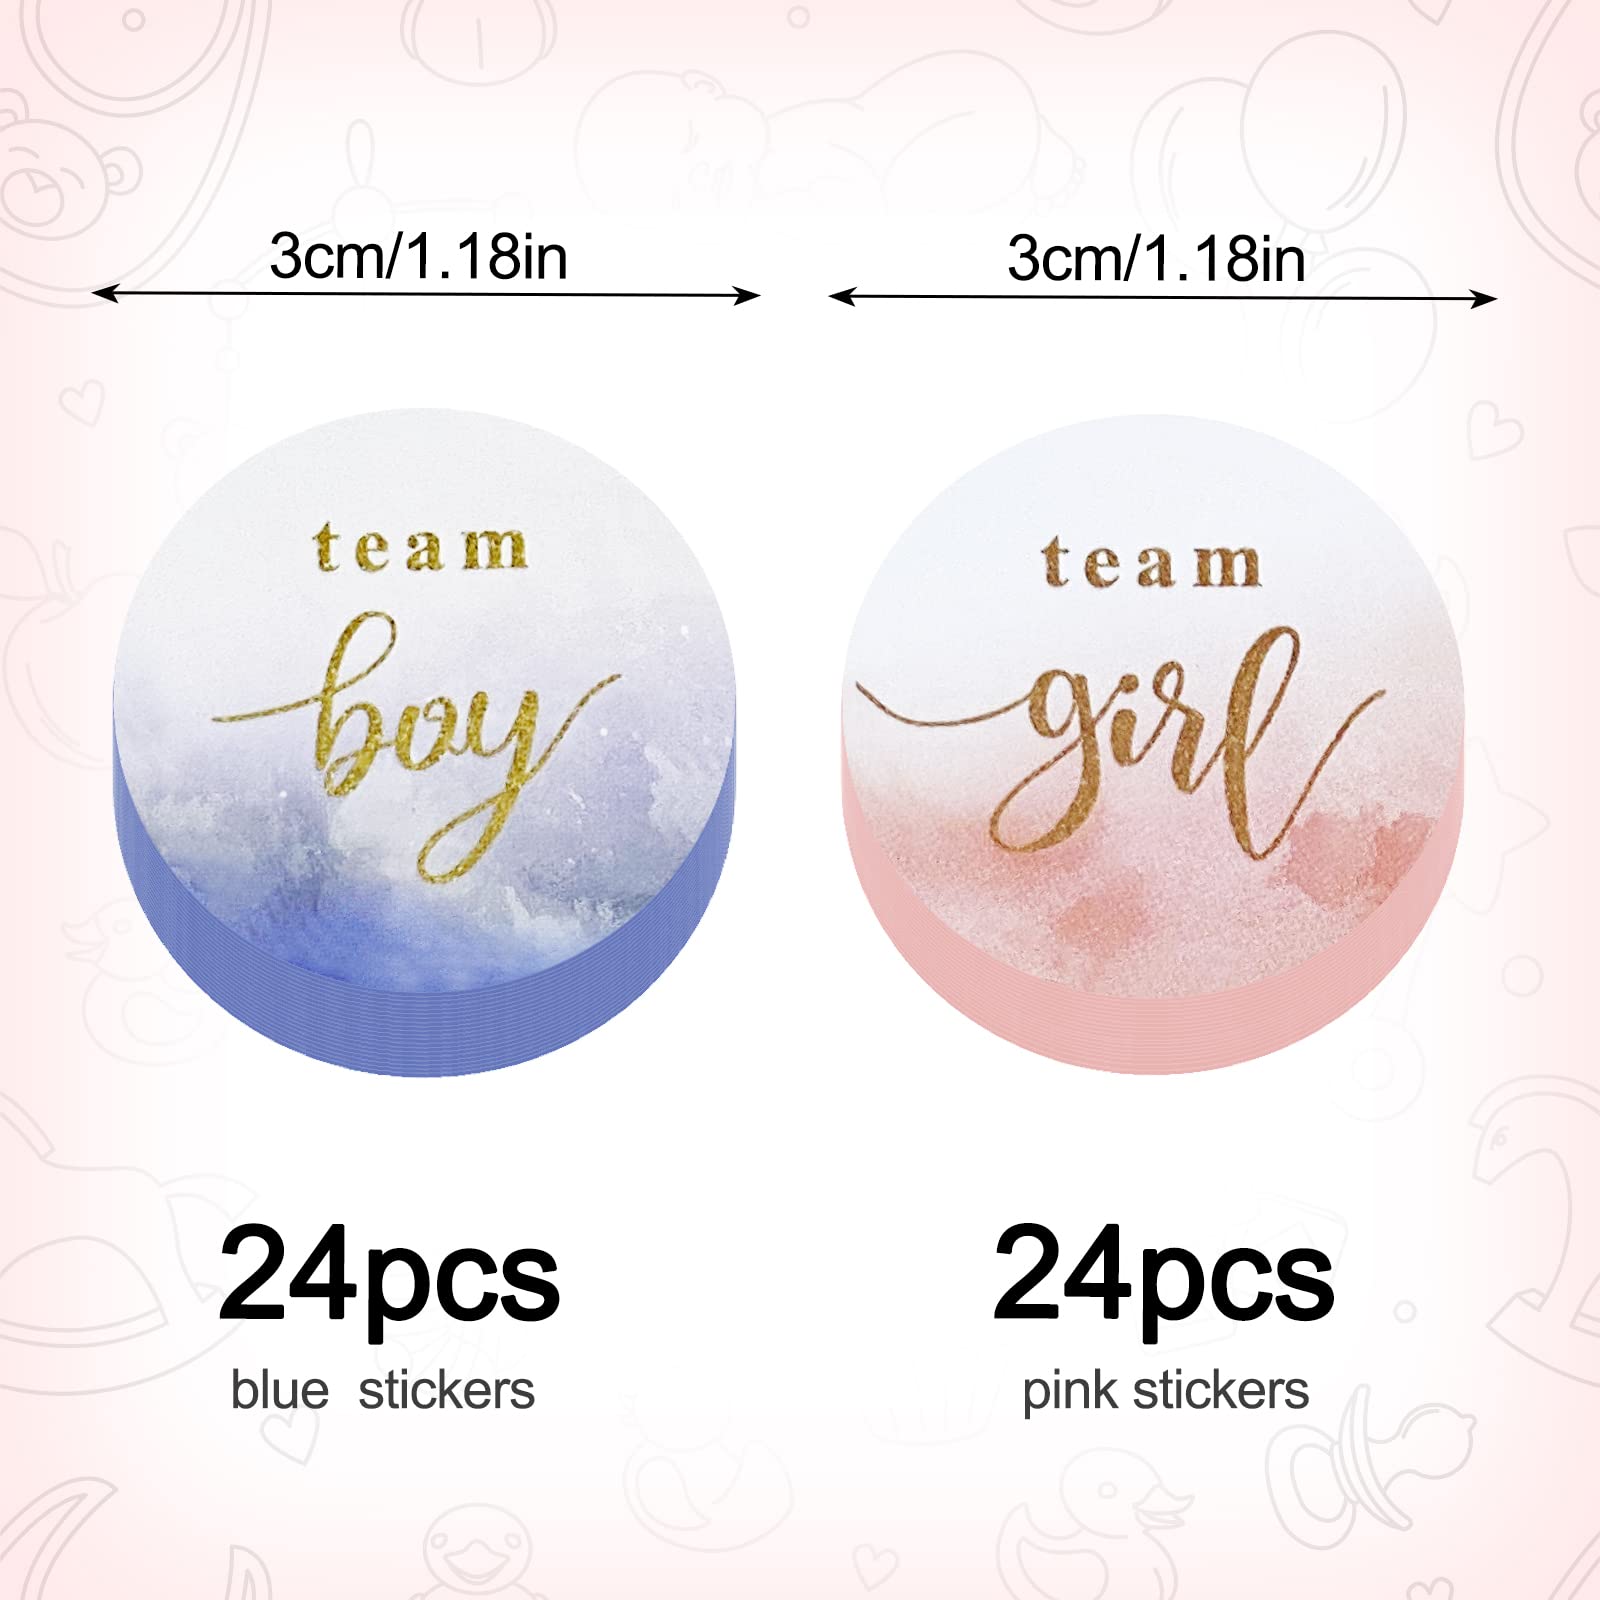 48Pcs Gender Reveal Stickers BOZILY Team Boy or Girl Stickers for Party Invitations and Voting Games Gender Reveal Games Labels for Baby Shower Decoration Supplies and Baby Showers